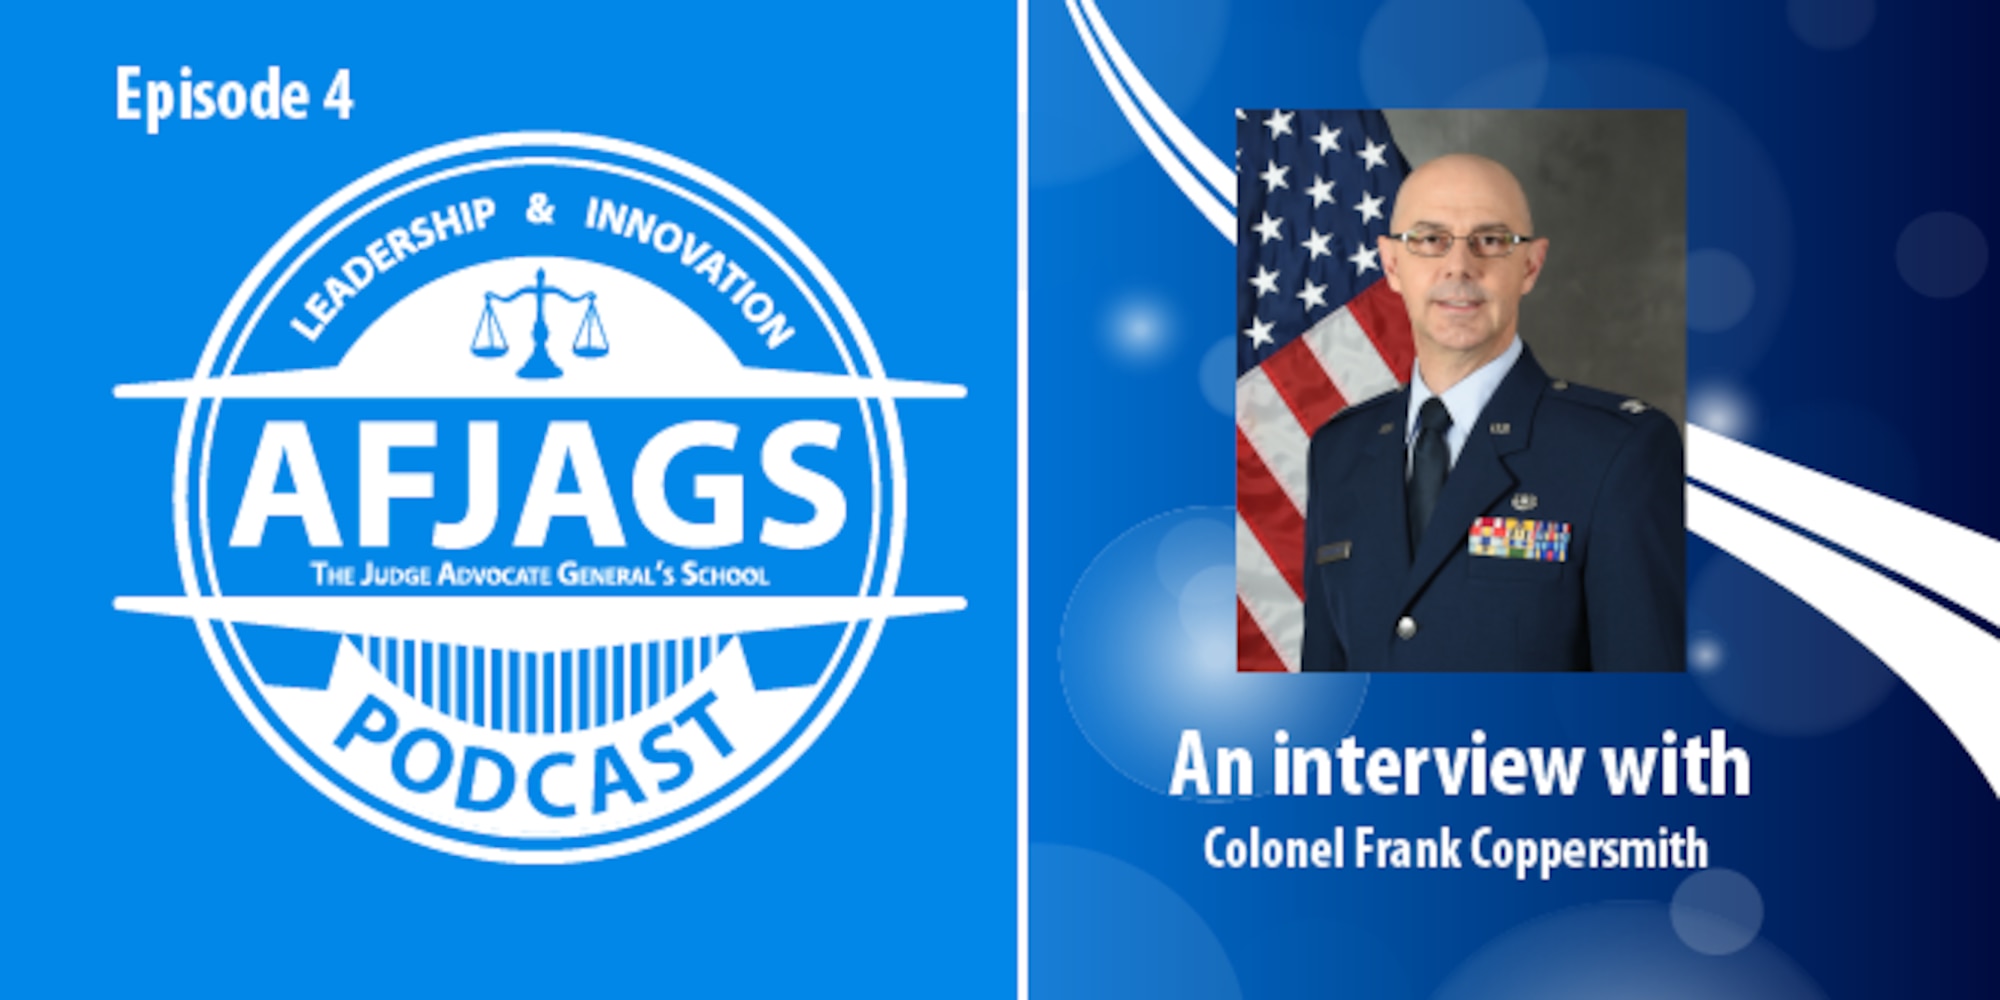 AFJAGS Podcast Episode 4, an interview with Colonel Frank Coppersmith